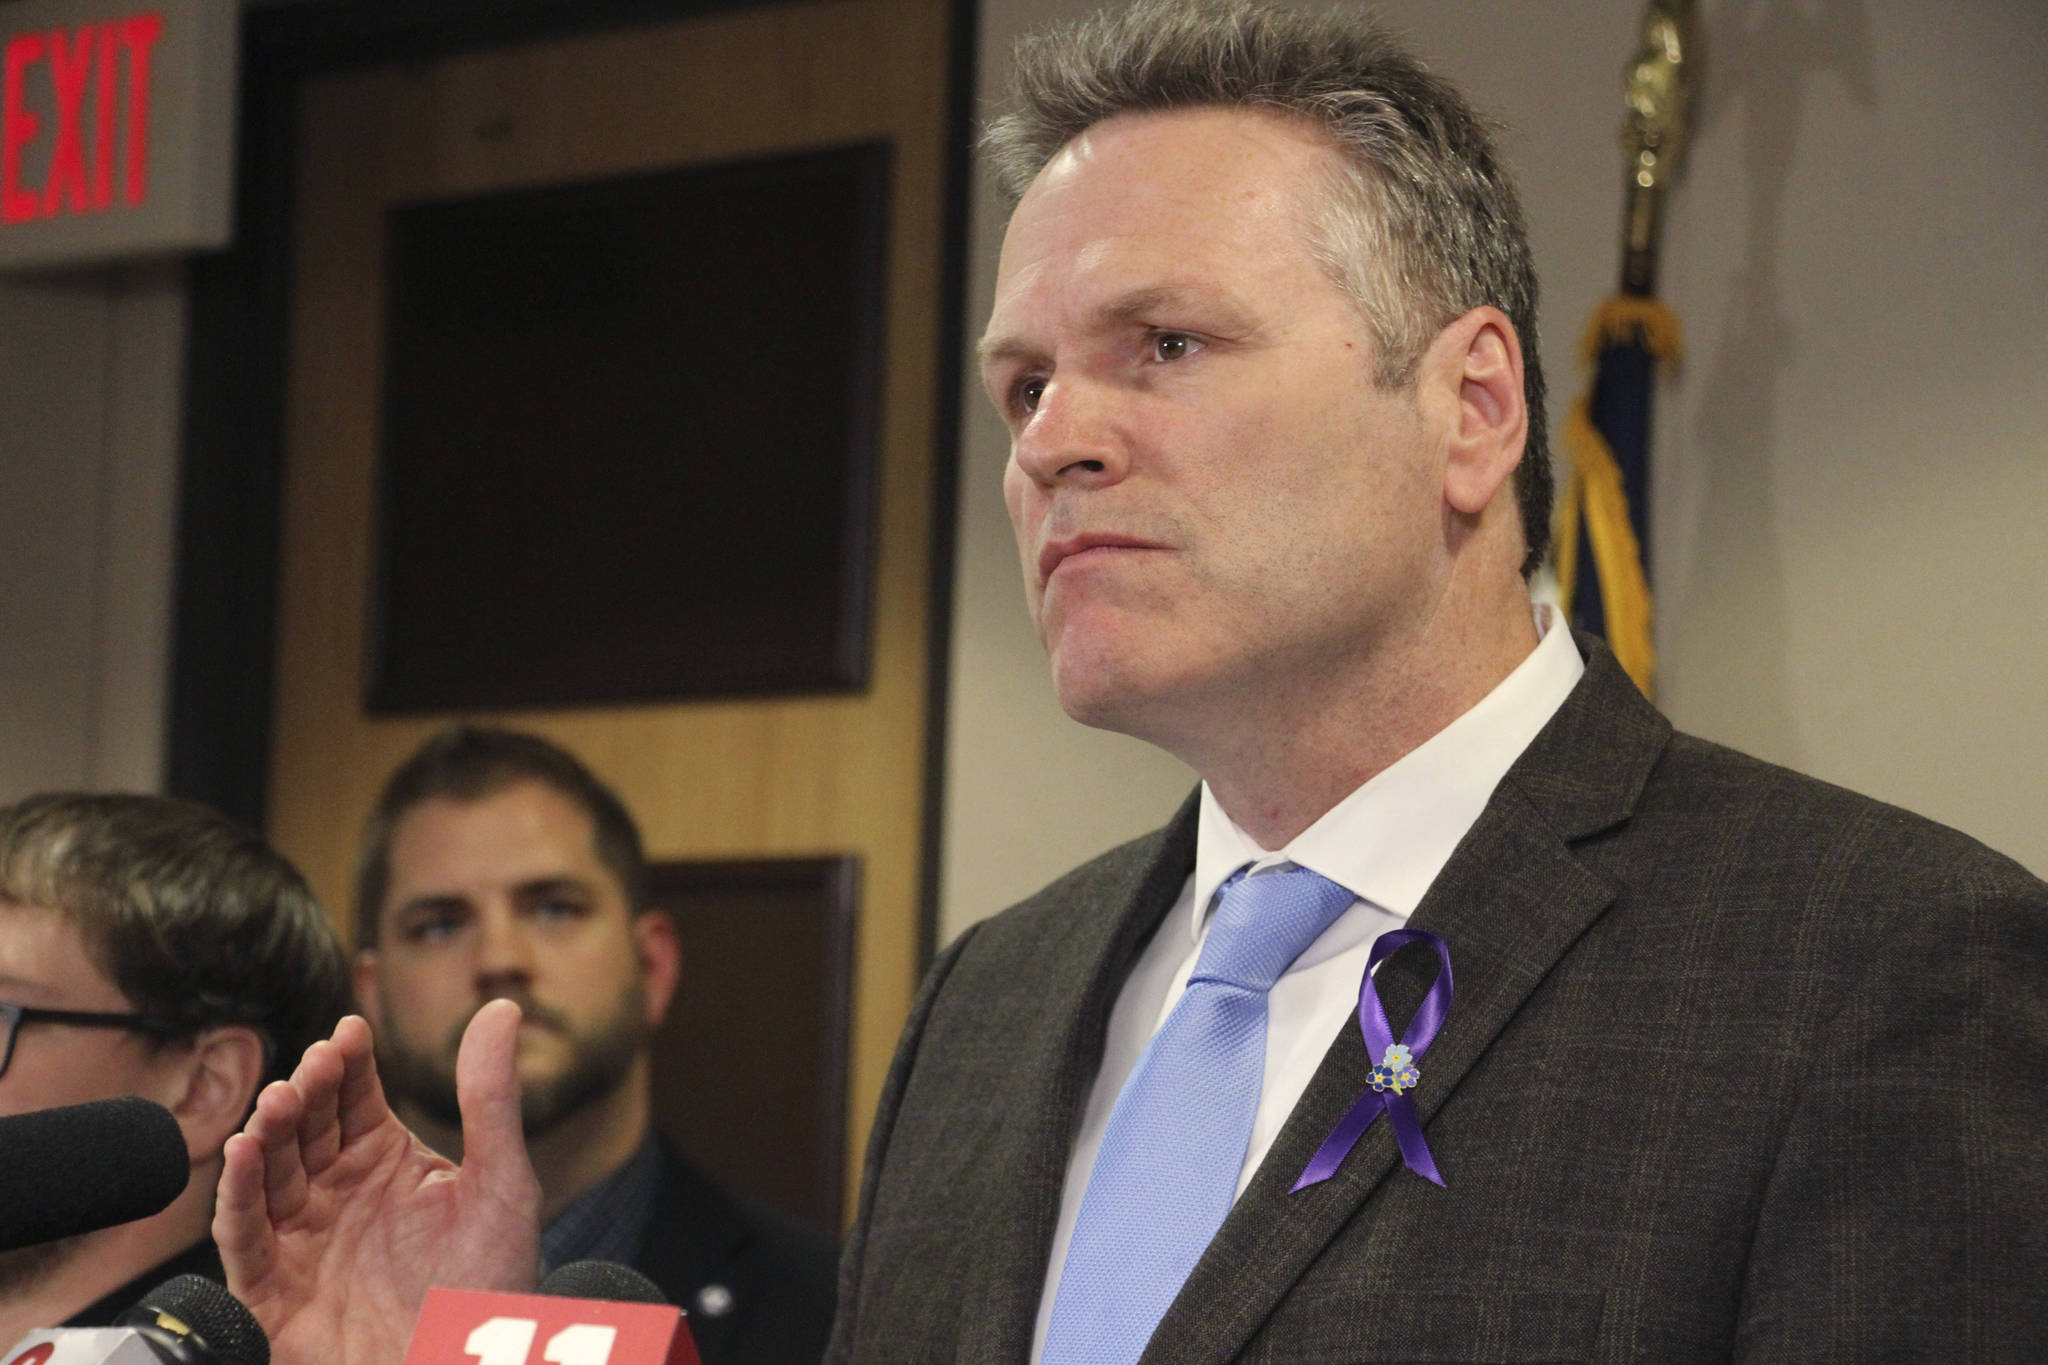 In this March 12 file photo, Alaska Gov. Mike Dunleavy speaks during a news conference in Anchorage . Dunleavy will pay $2,800 to reimburse the state for ads an independent counsel found were political and violated ethics rules, according to a recently released settlement. (AP Photo/Mark Thiessen, File)